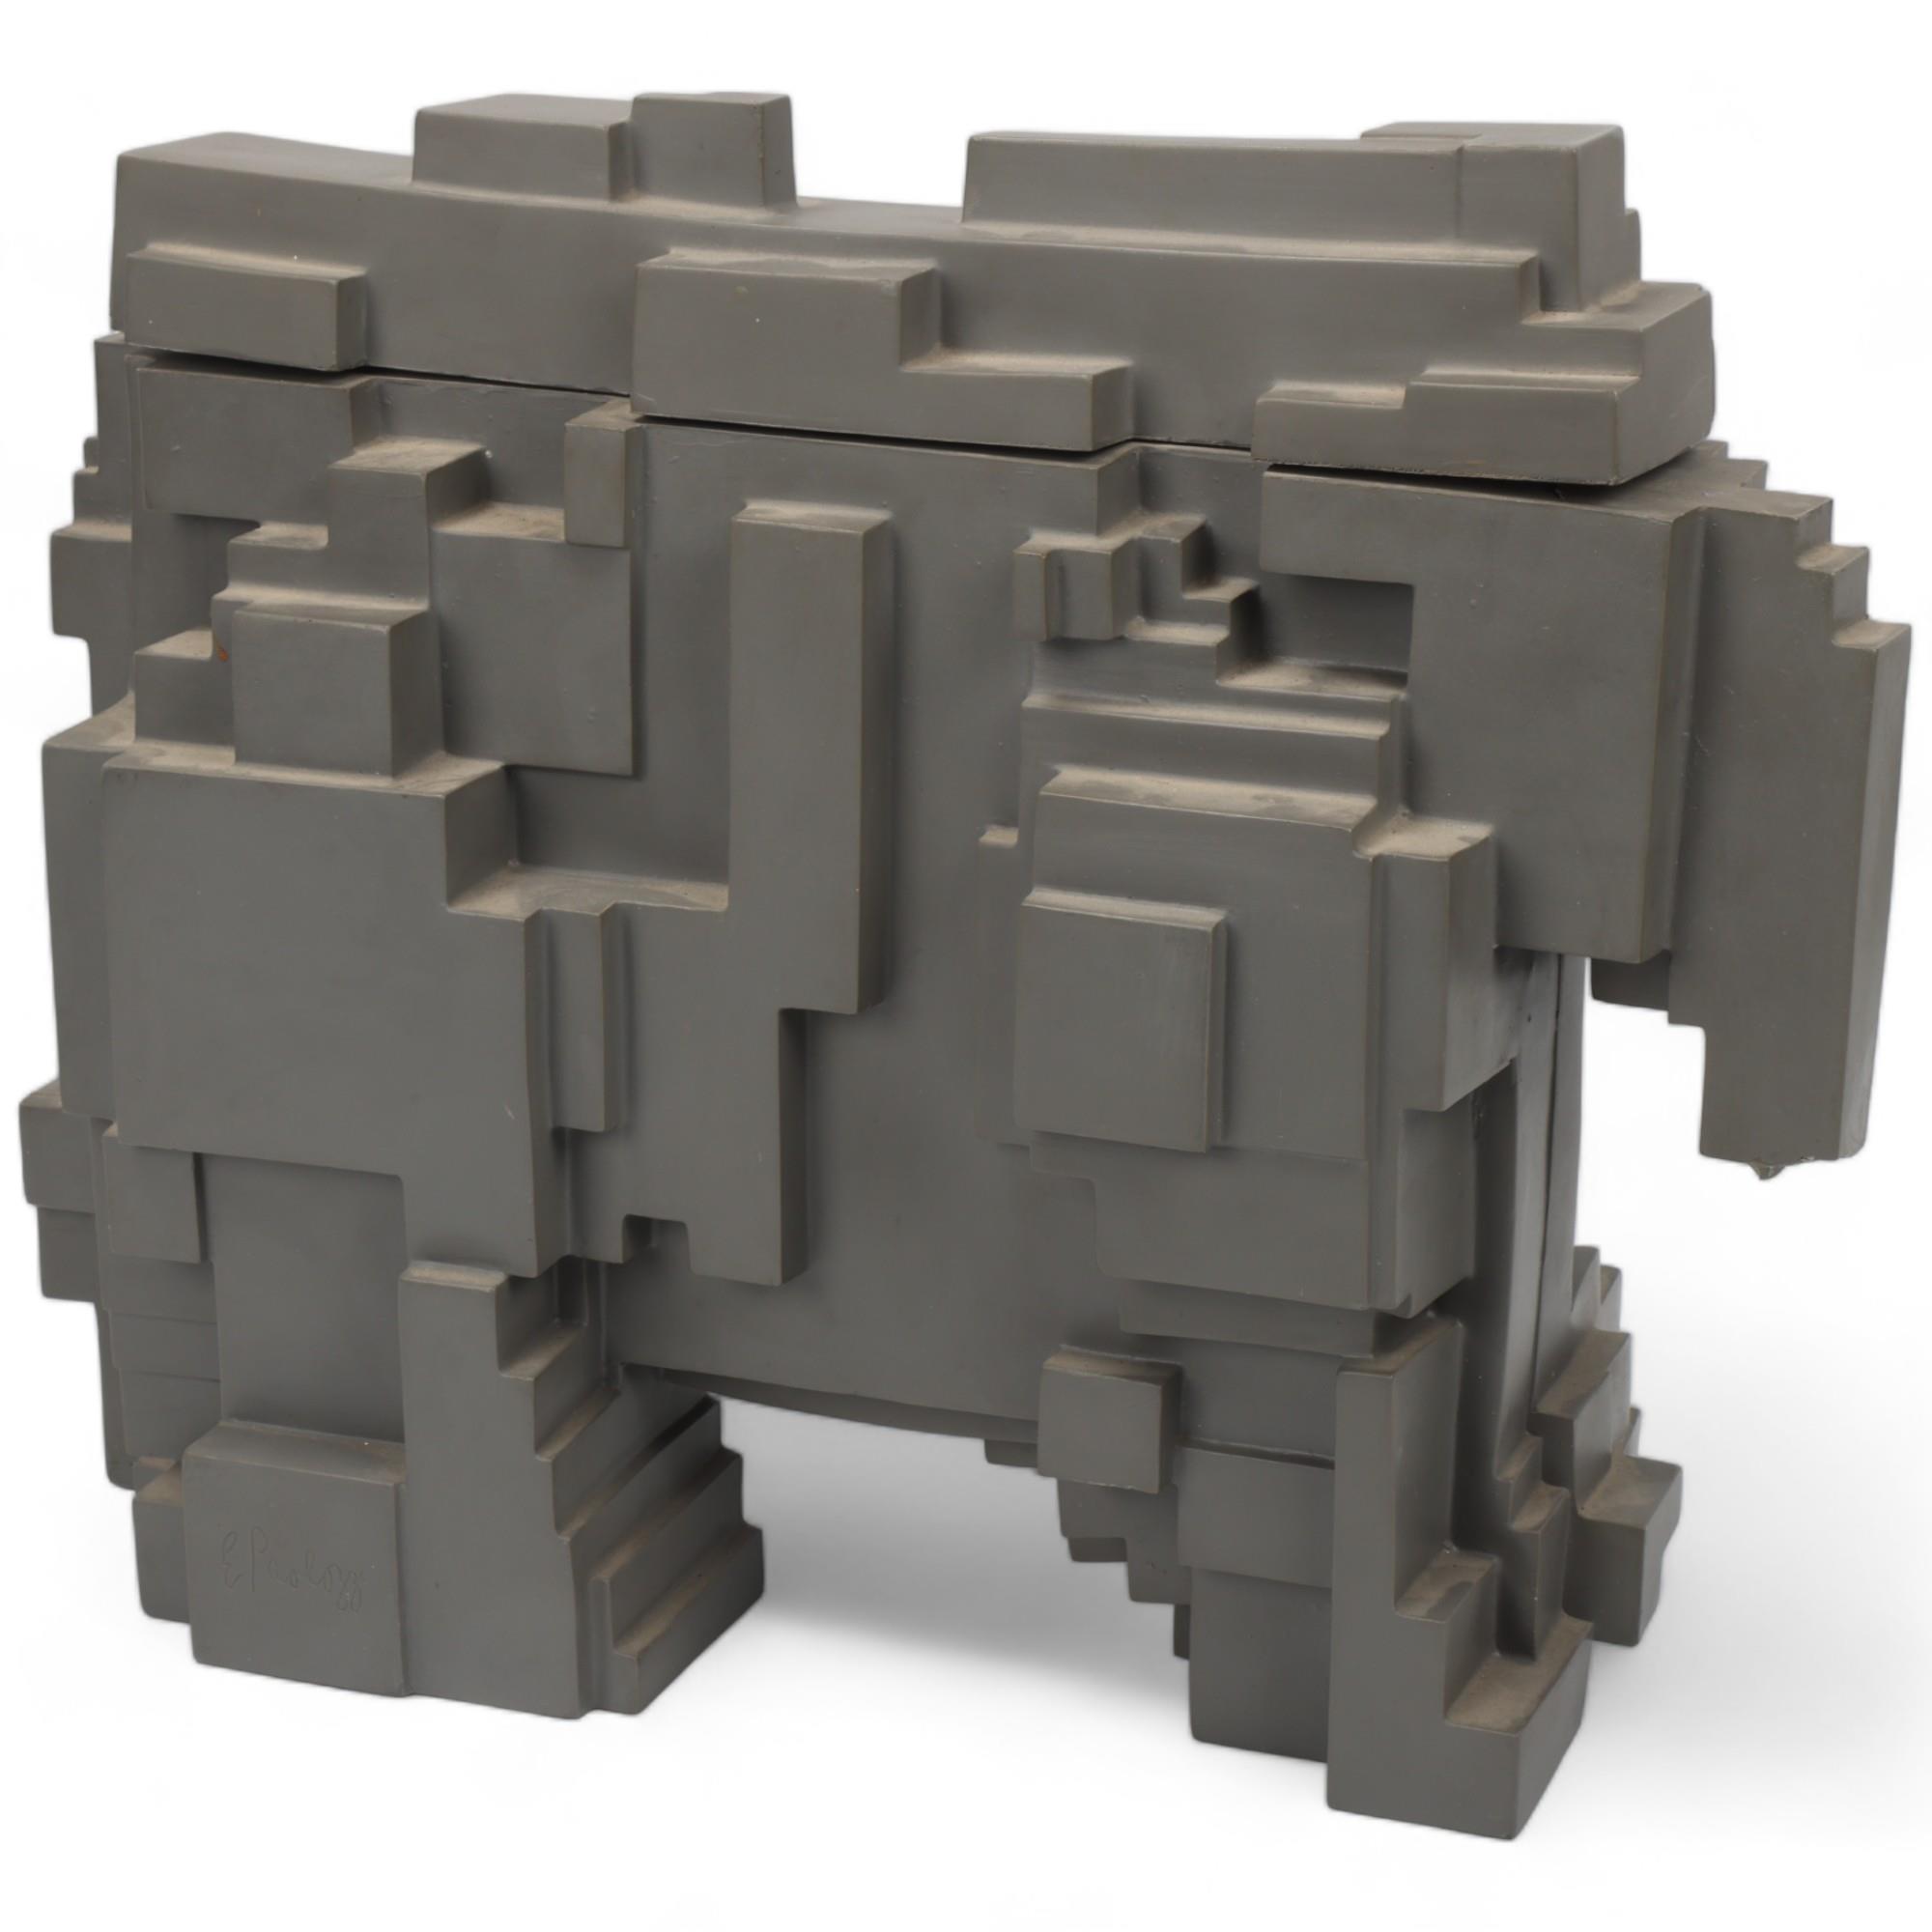 SIR EDUARDO PAOLOZZI (1924-2005), Elephant (1972), a moulded composite abstract figure, signed and